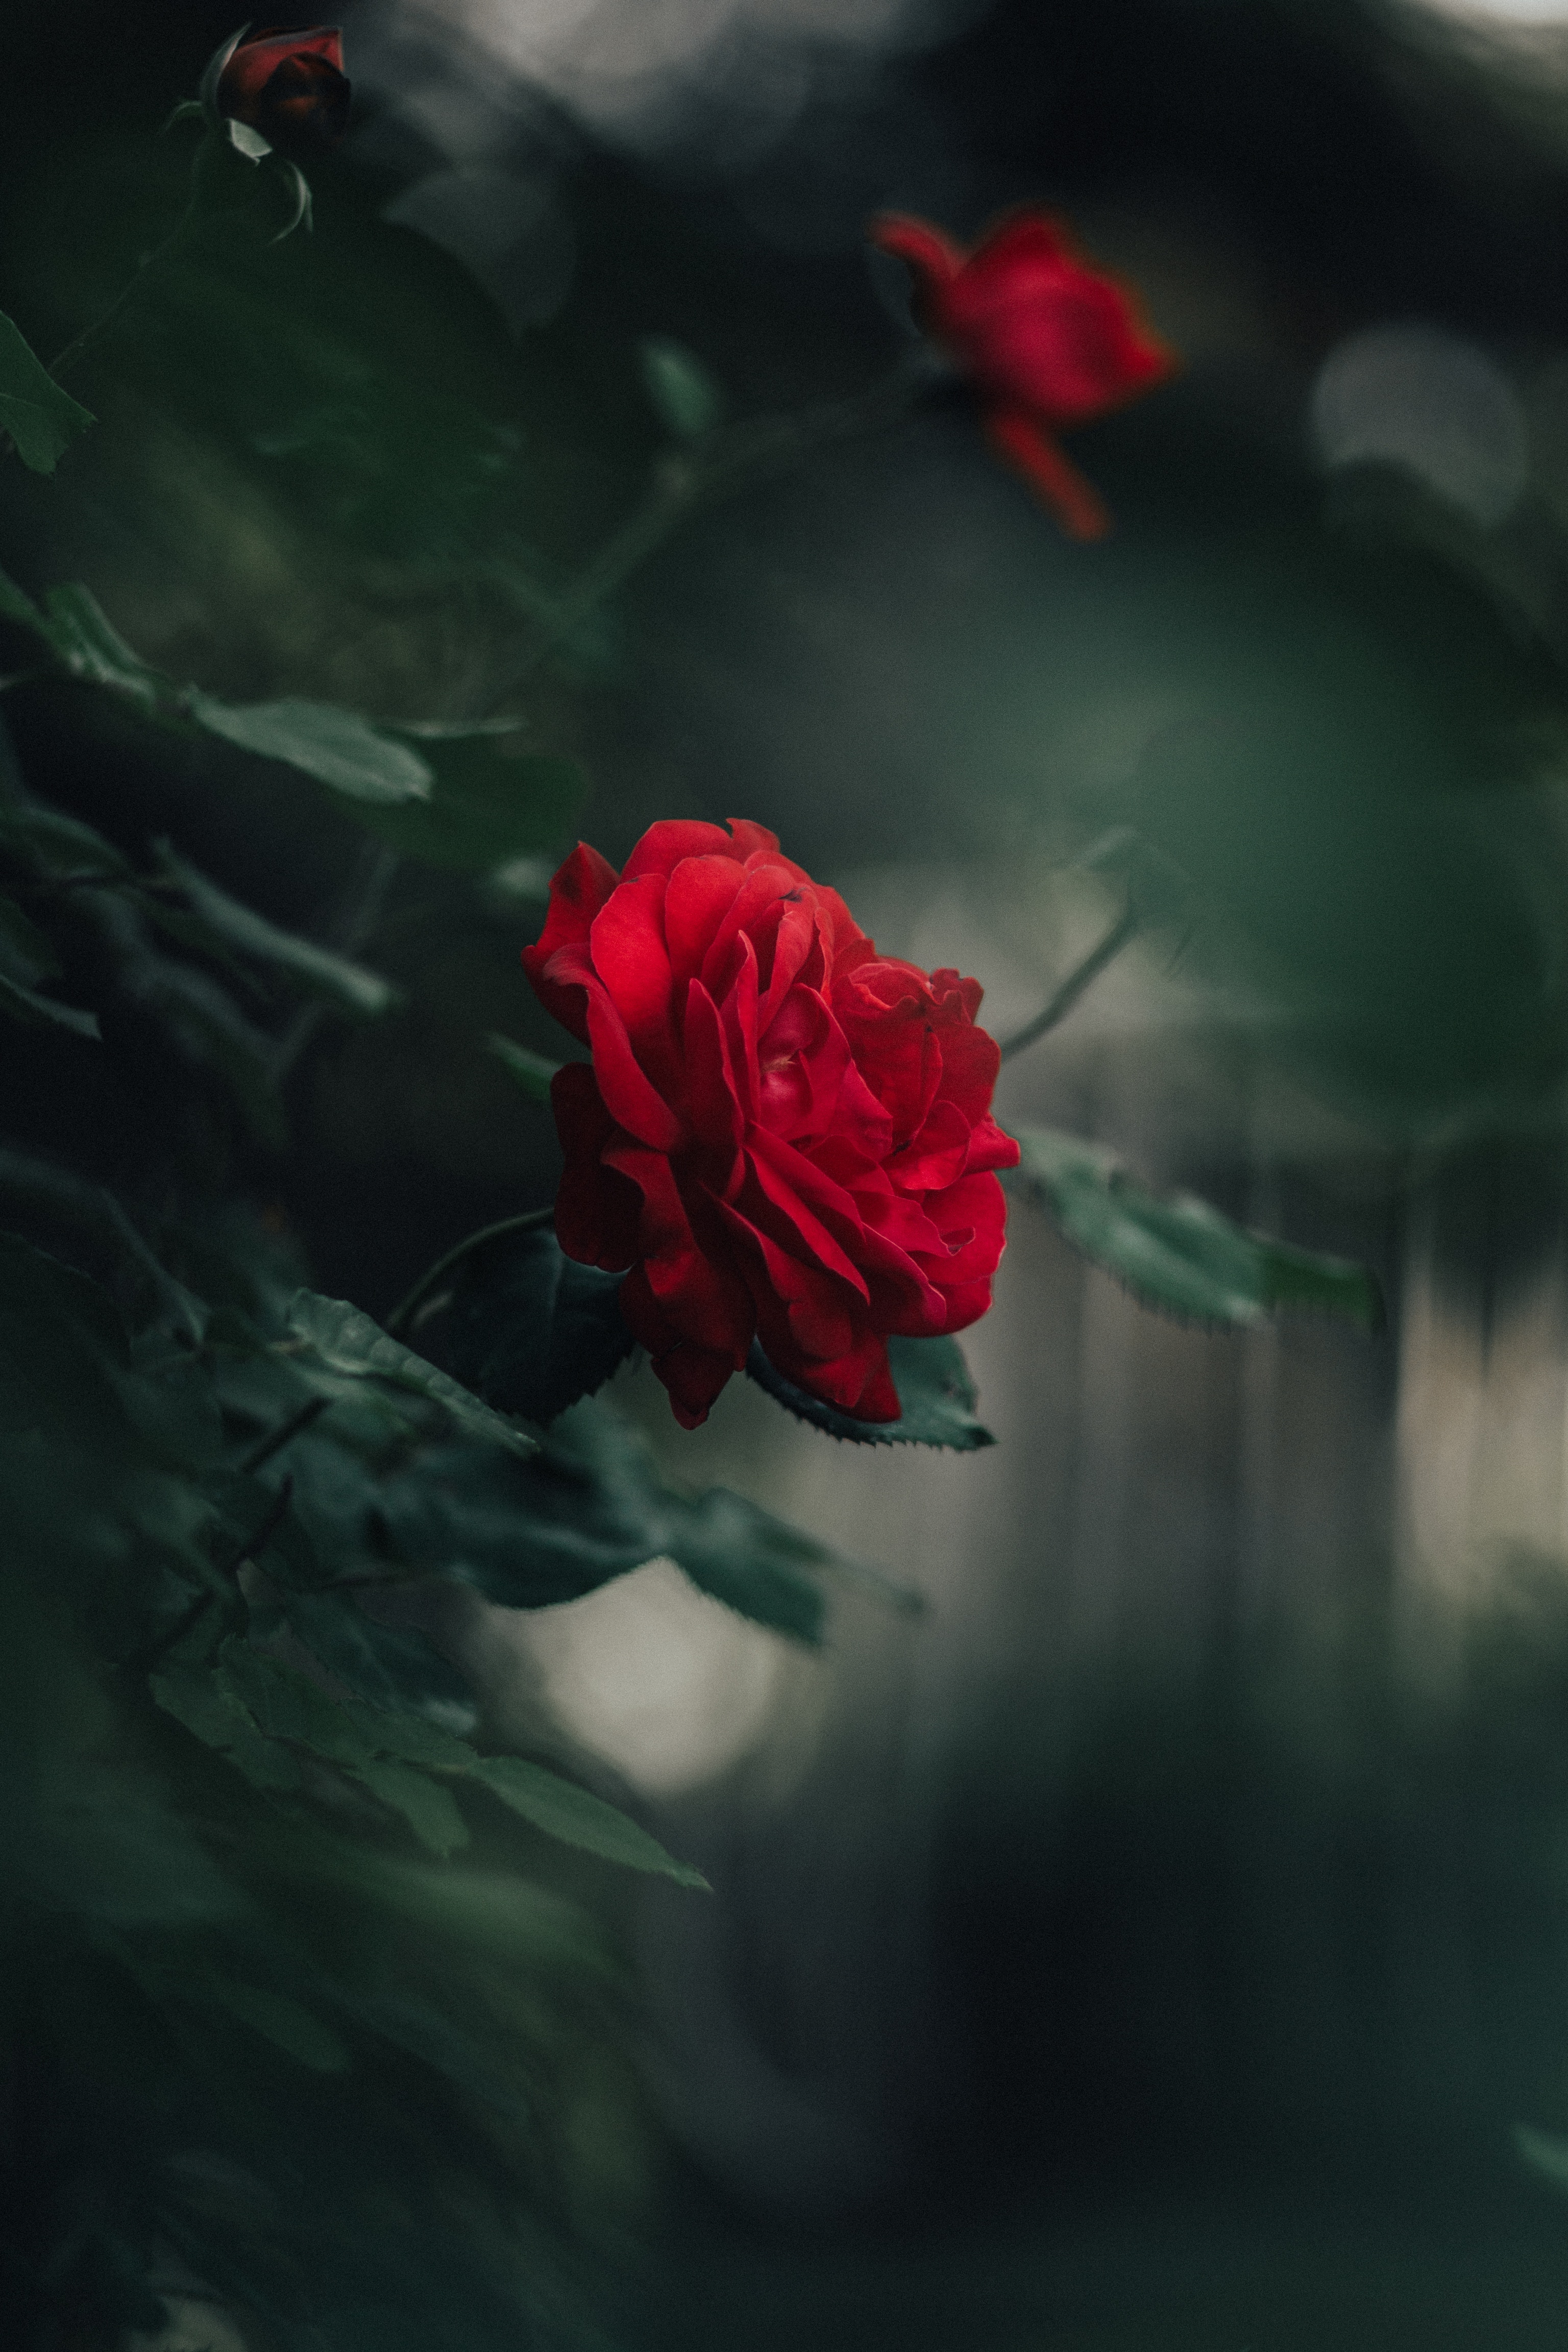 smooth, blur, rose flower, petals, flowers, red, rose, bud phone background